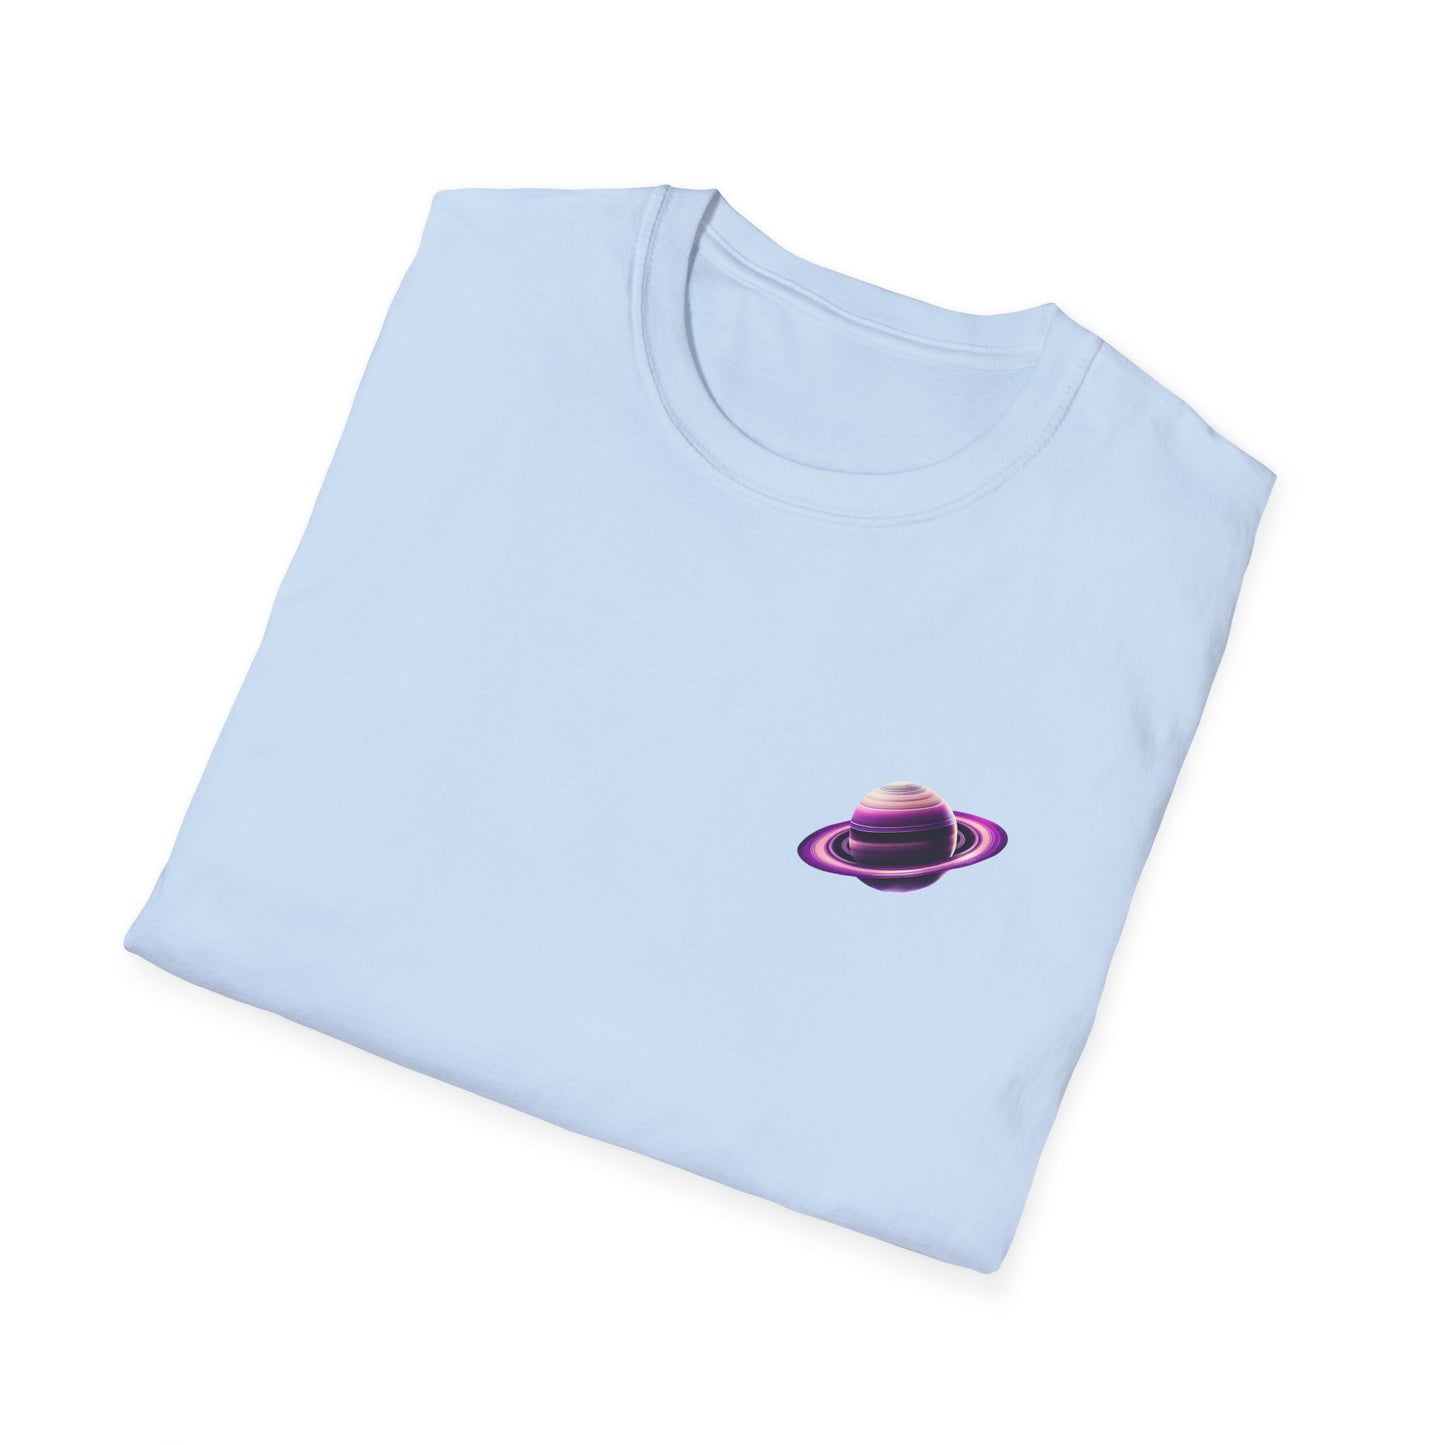 Asexual planet, T-Shirt